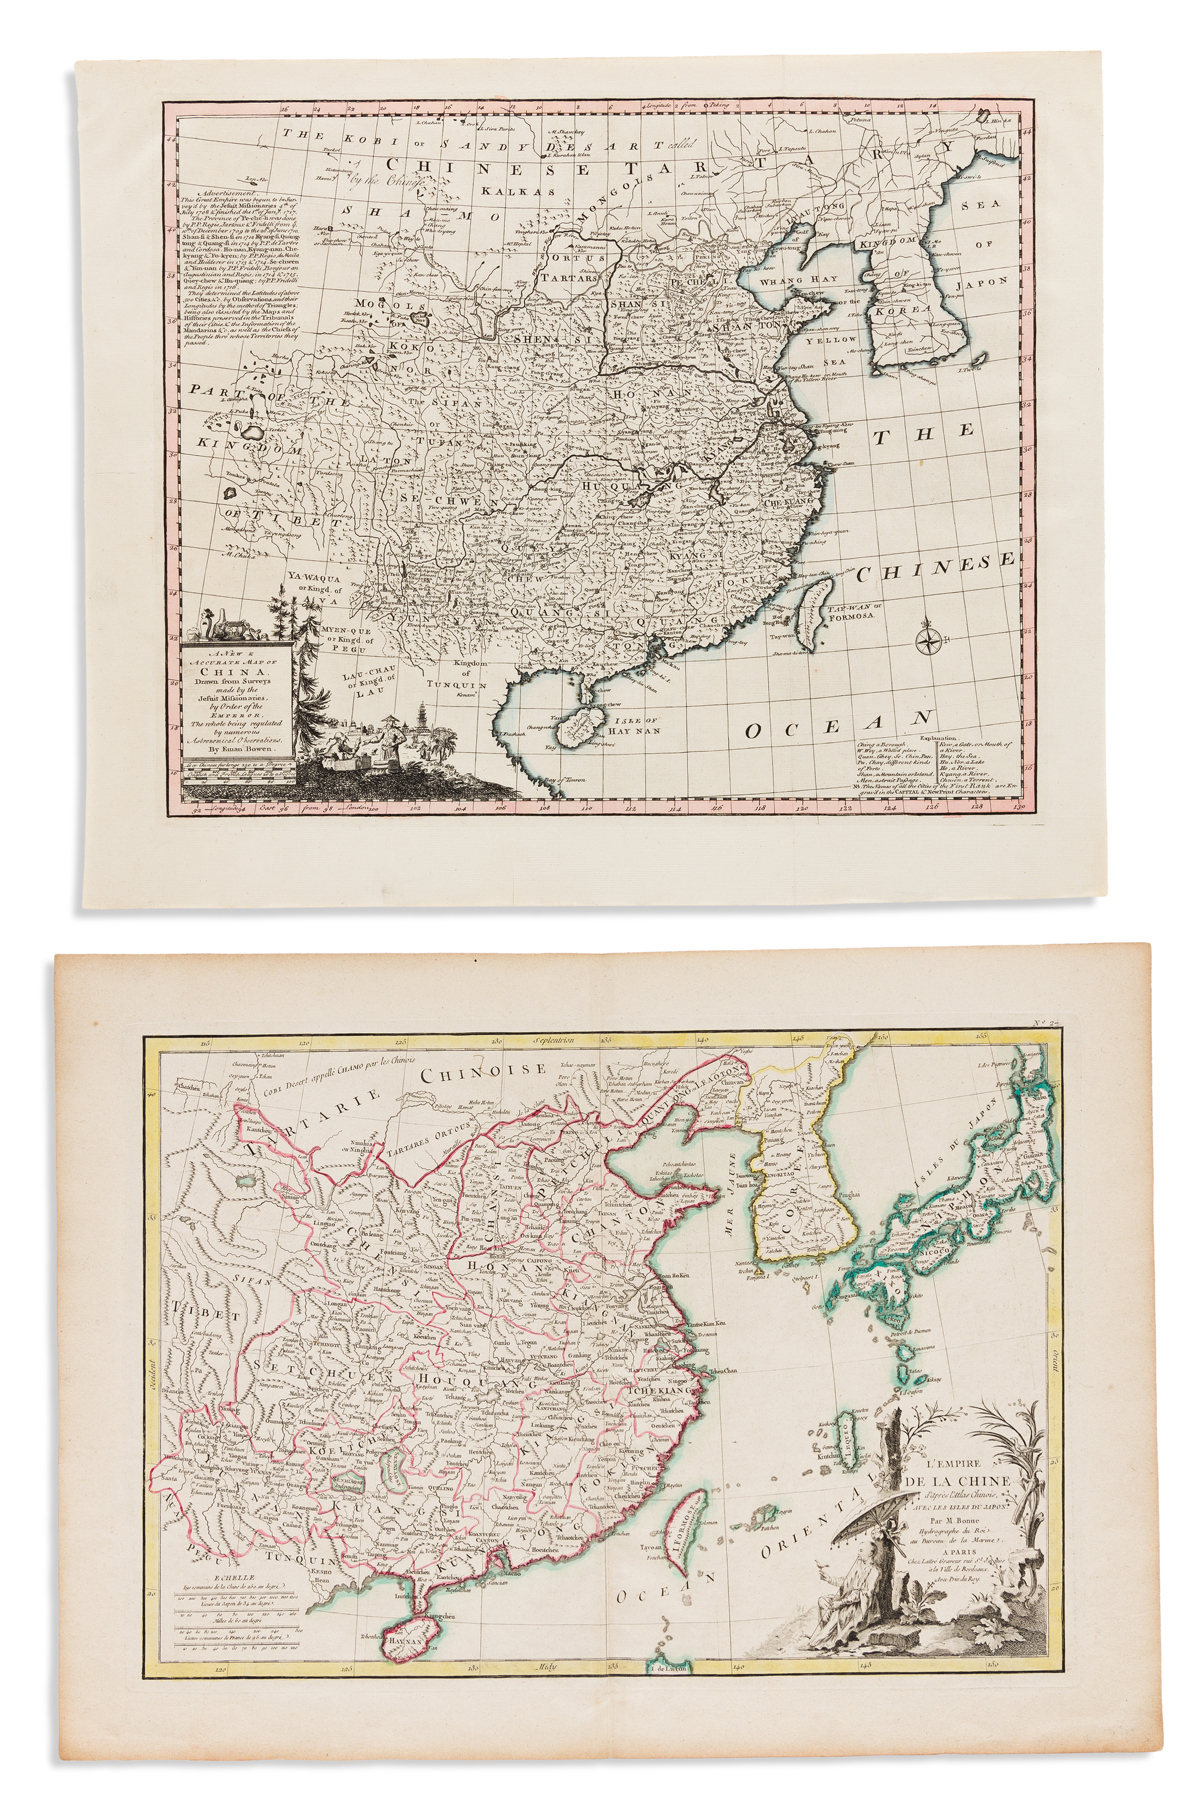 (CHINA.) Group of 4 eighteenth-century engraved maps of China and Korea.